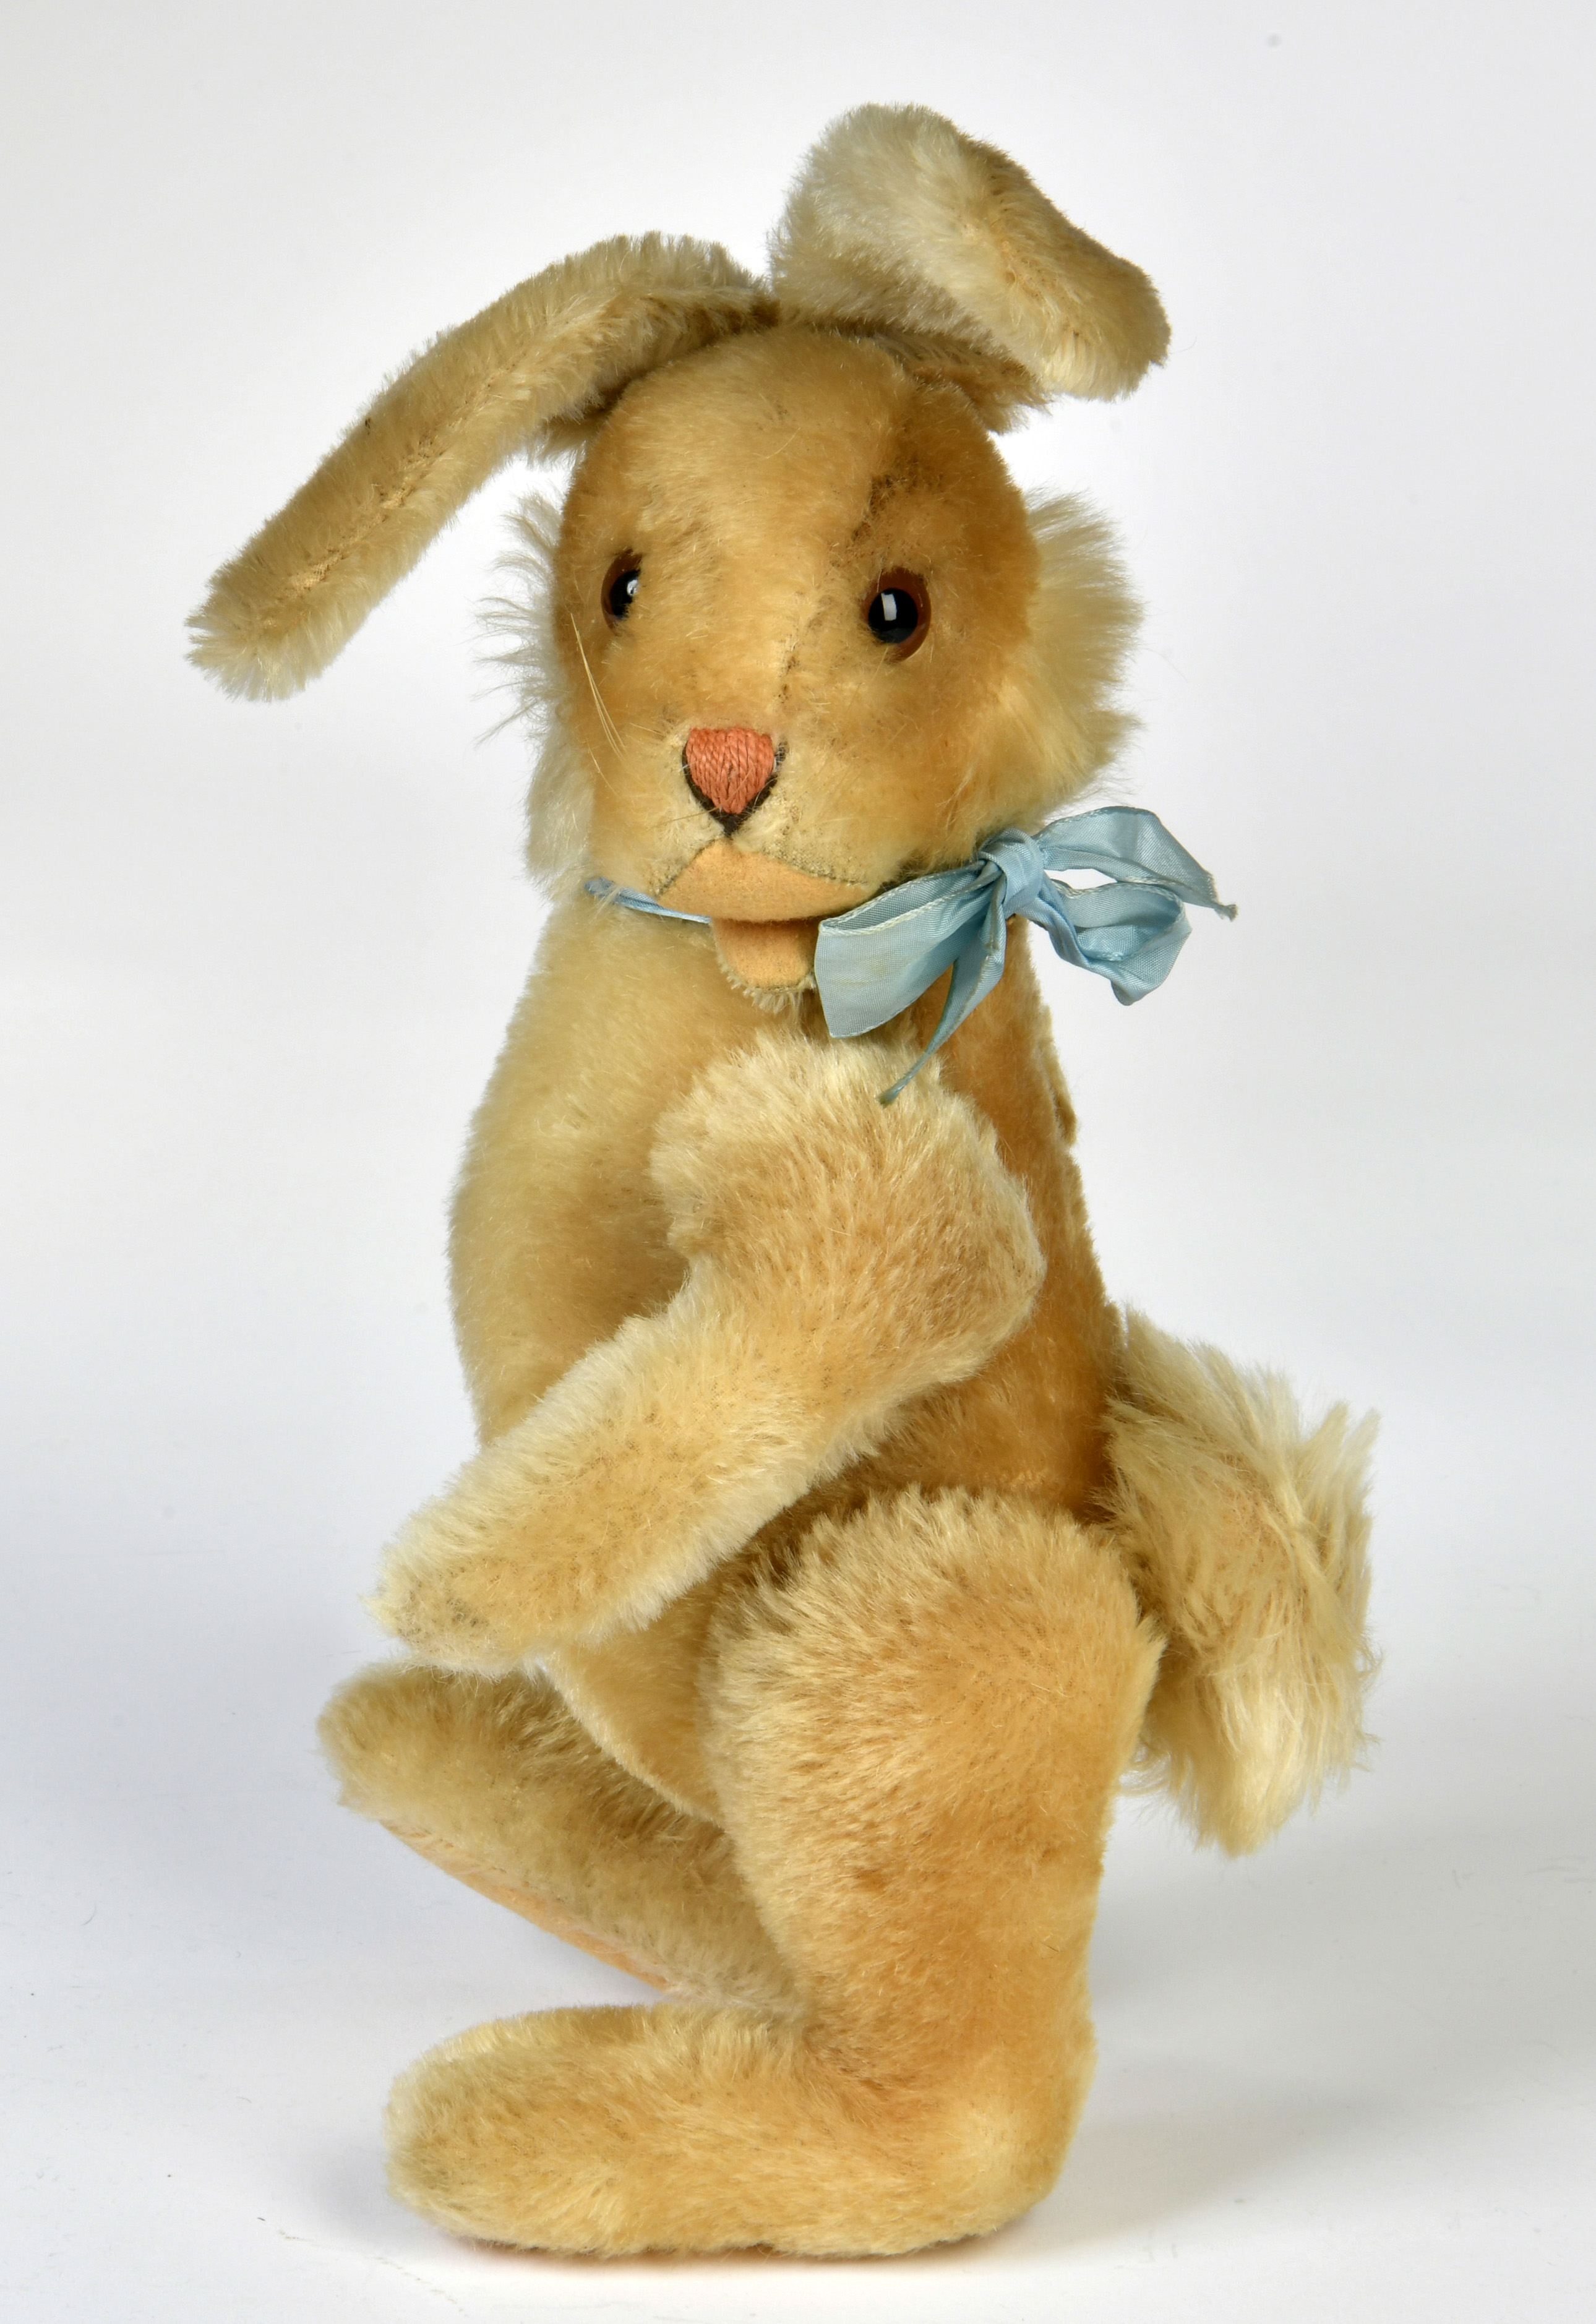 Steiff, rabbit Niki, 43 cm, 1950s/1960s, with buttom, very good condition - Image 2 of 2